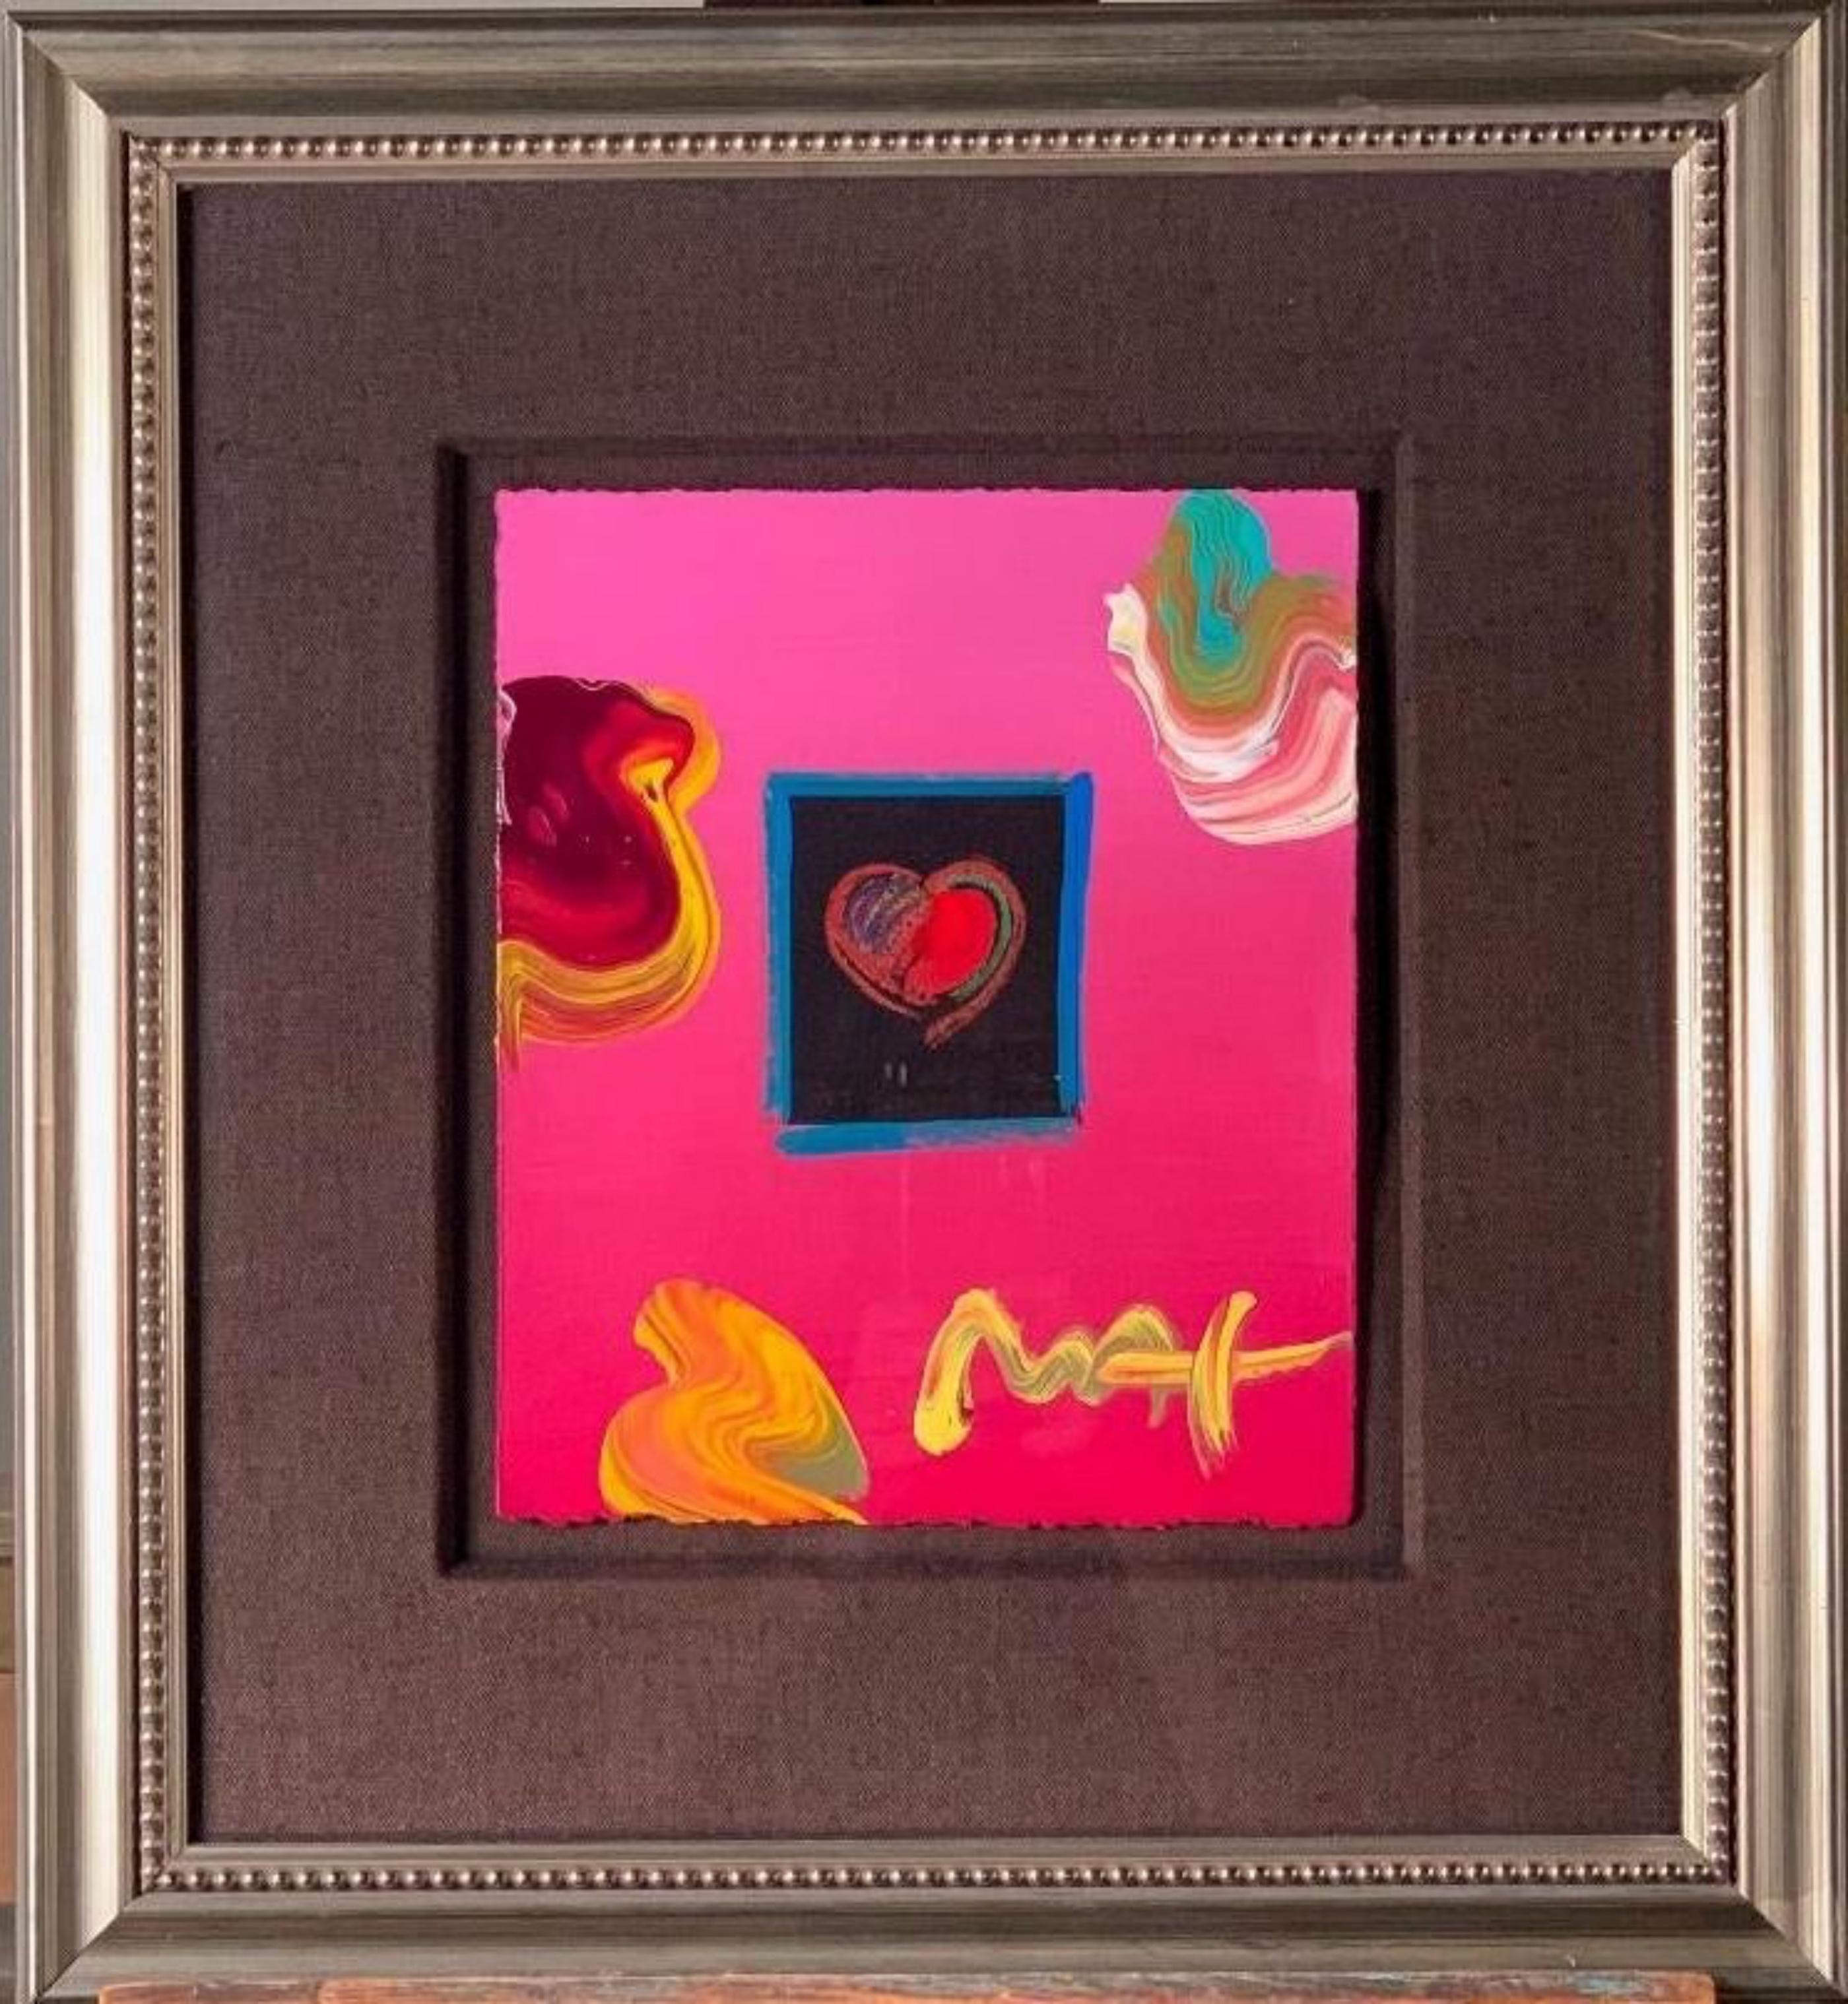 Peter Max
Heart Painting (signed twice, with an additional original drawing in black marker on the verso of frame), 2002
Acrylic on paper painting; with separate original drawing, signed and inscribed, verso of frame
The work is hand signed on the